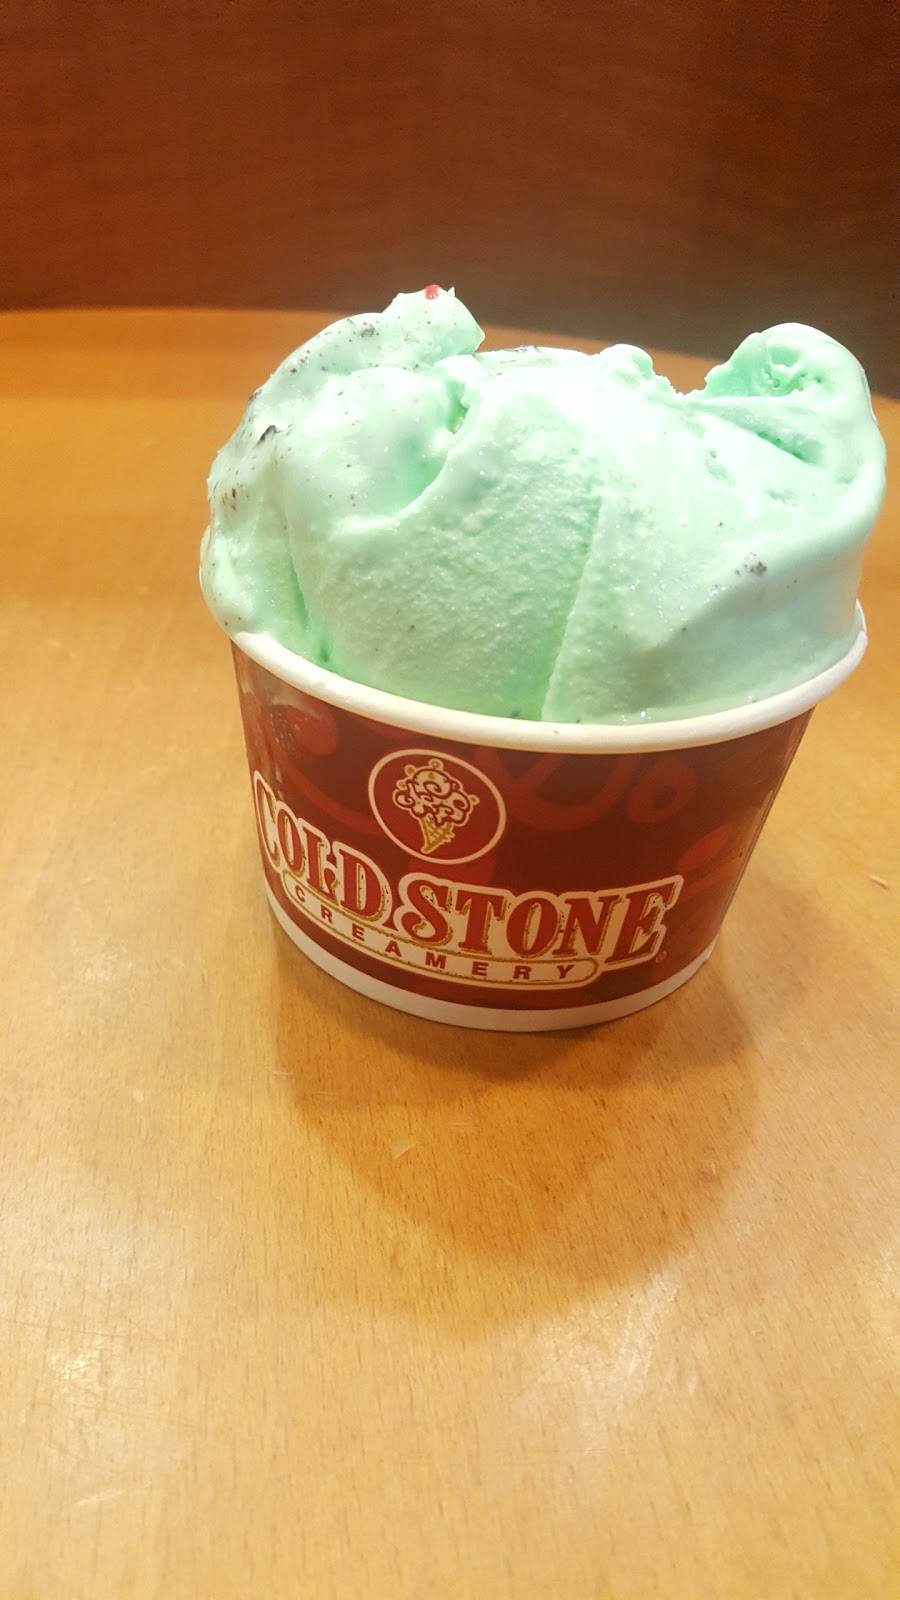 Cold Stone Creamery | bakery | 2323 Black Rock Turnpike, Fairfield, CT 06825, USA | 2033714111 OR +1 203-371-4111